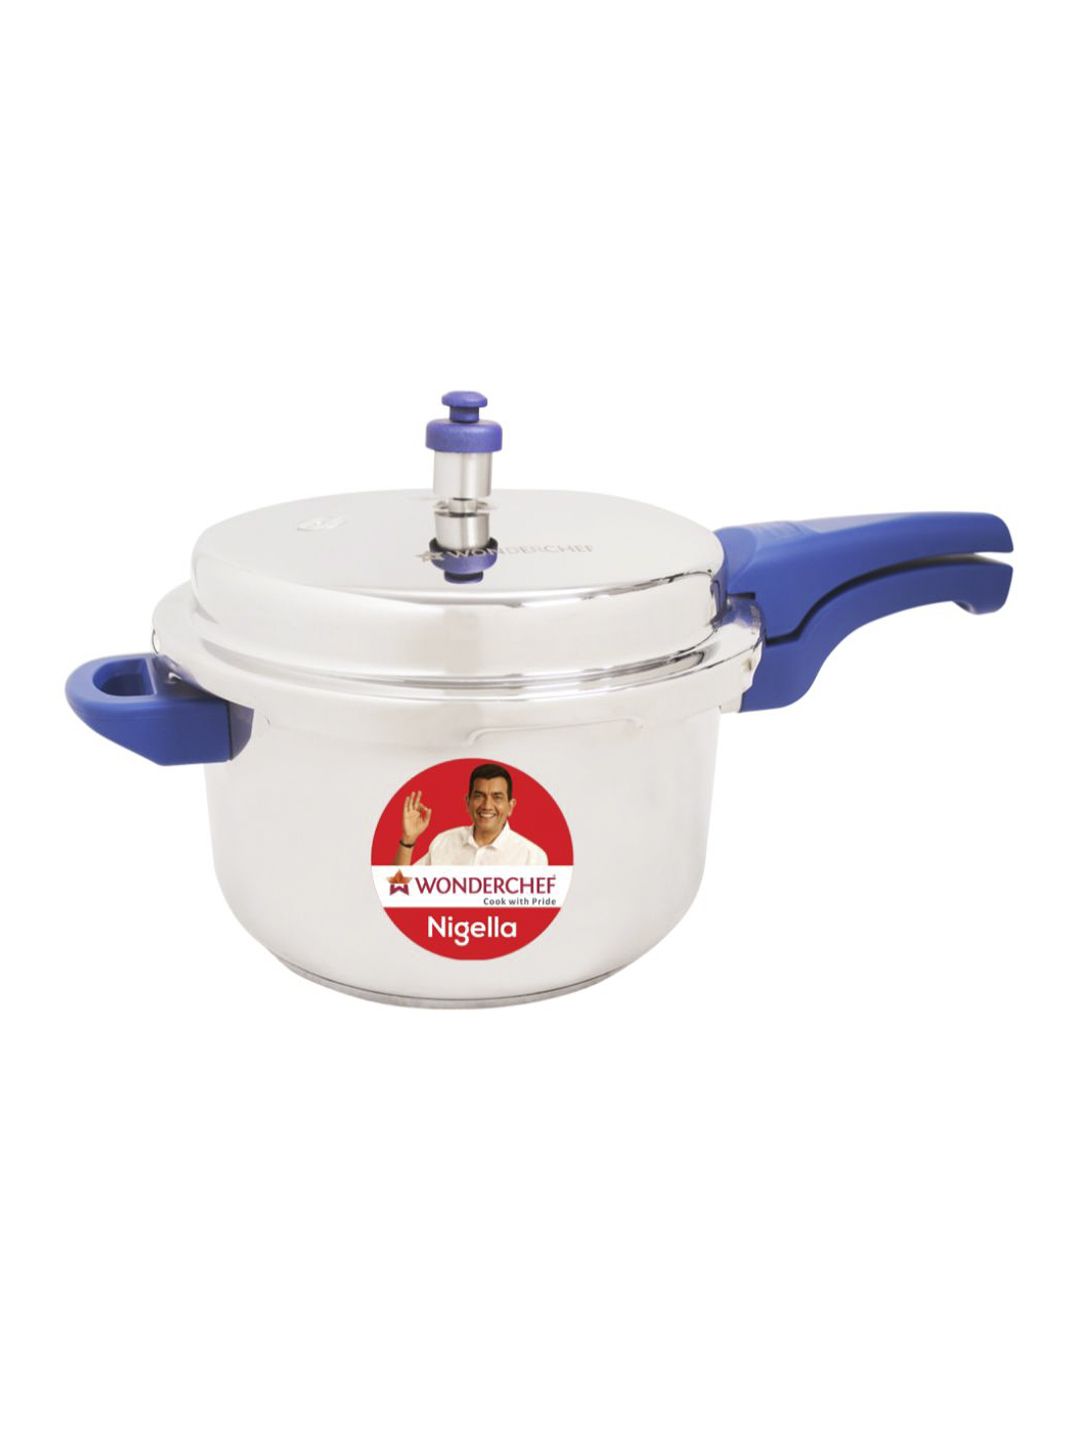 Wonderchef Silver-Toned & Blue Solid Stainless Steel Pressure Cooker Price in India